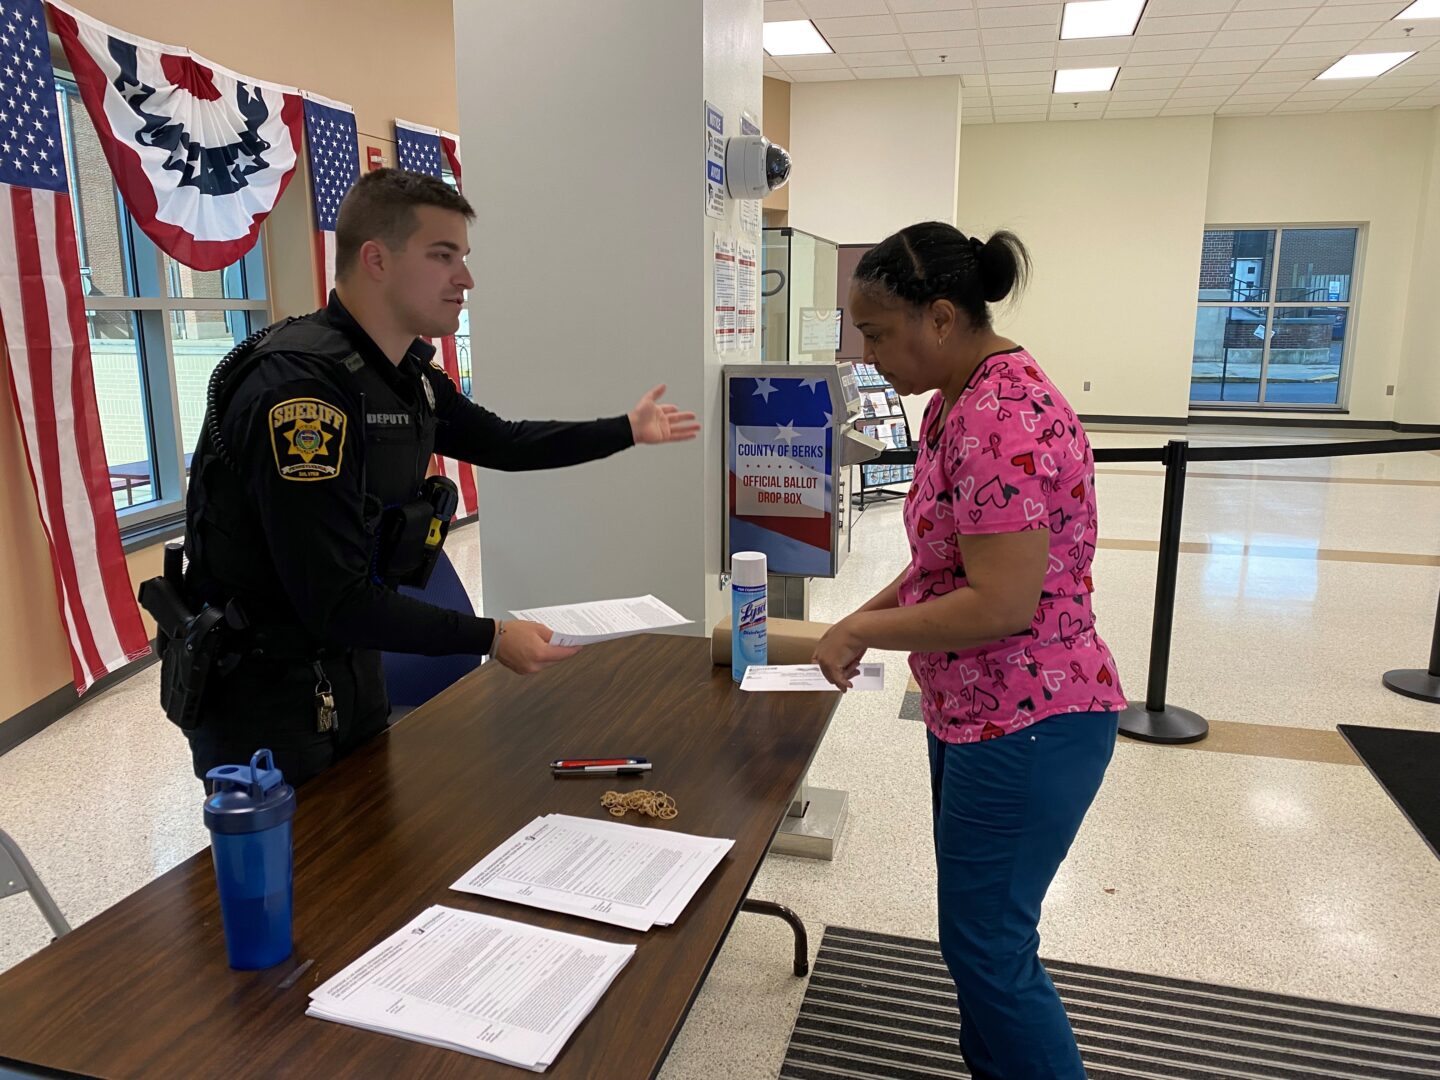 Berks County Deputy Sheriff Riley Gutierrez tells caretaker Lis Mejia that she will have to fill out a form to drop off the ballot for her client, 78-year-old Leonor McCoroy.